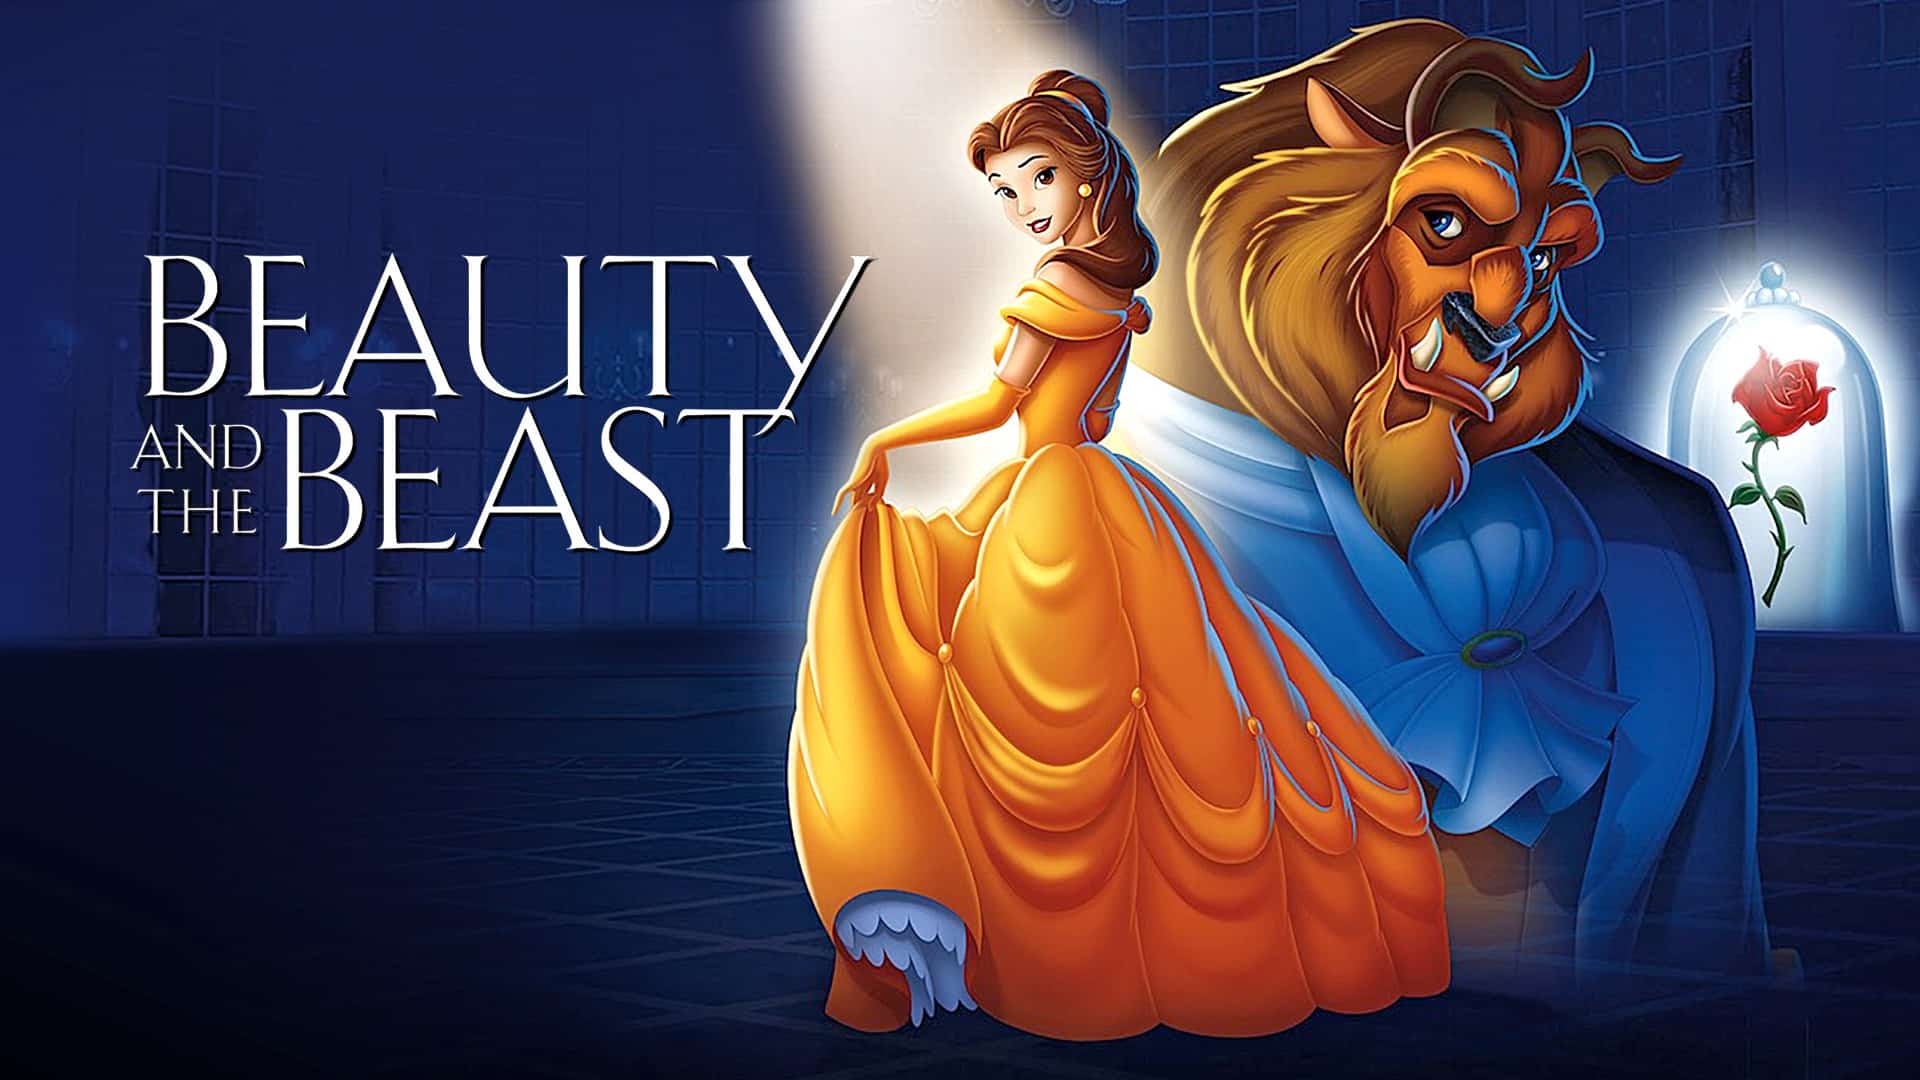 "Beauty And The Beast" (1991) movie poster